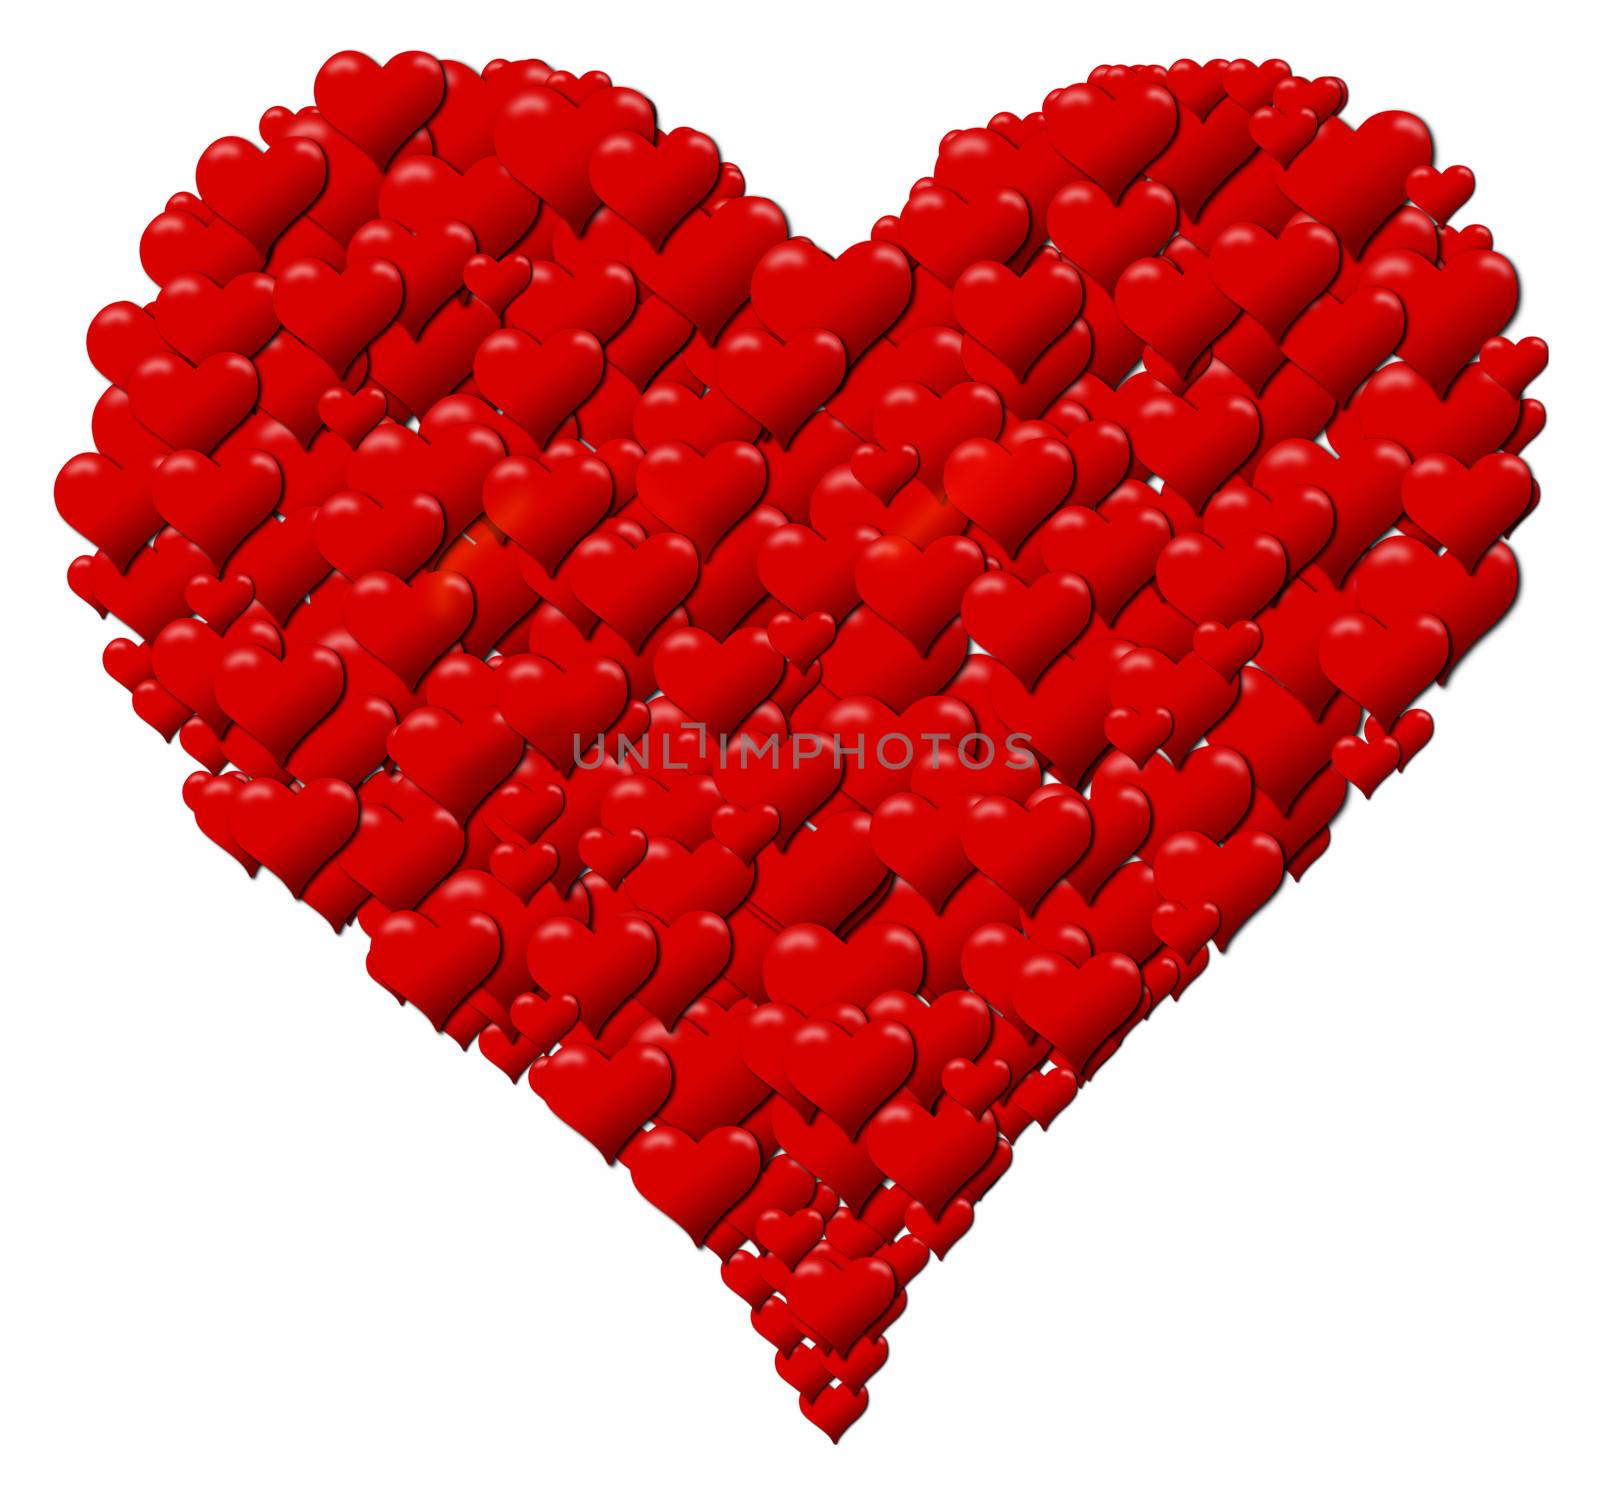 Heart made of hearts for a Valentine's Day or Mother's Day on a white background